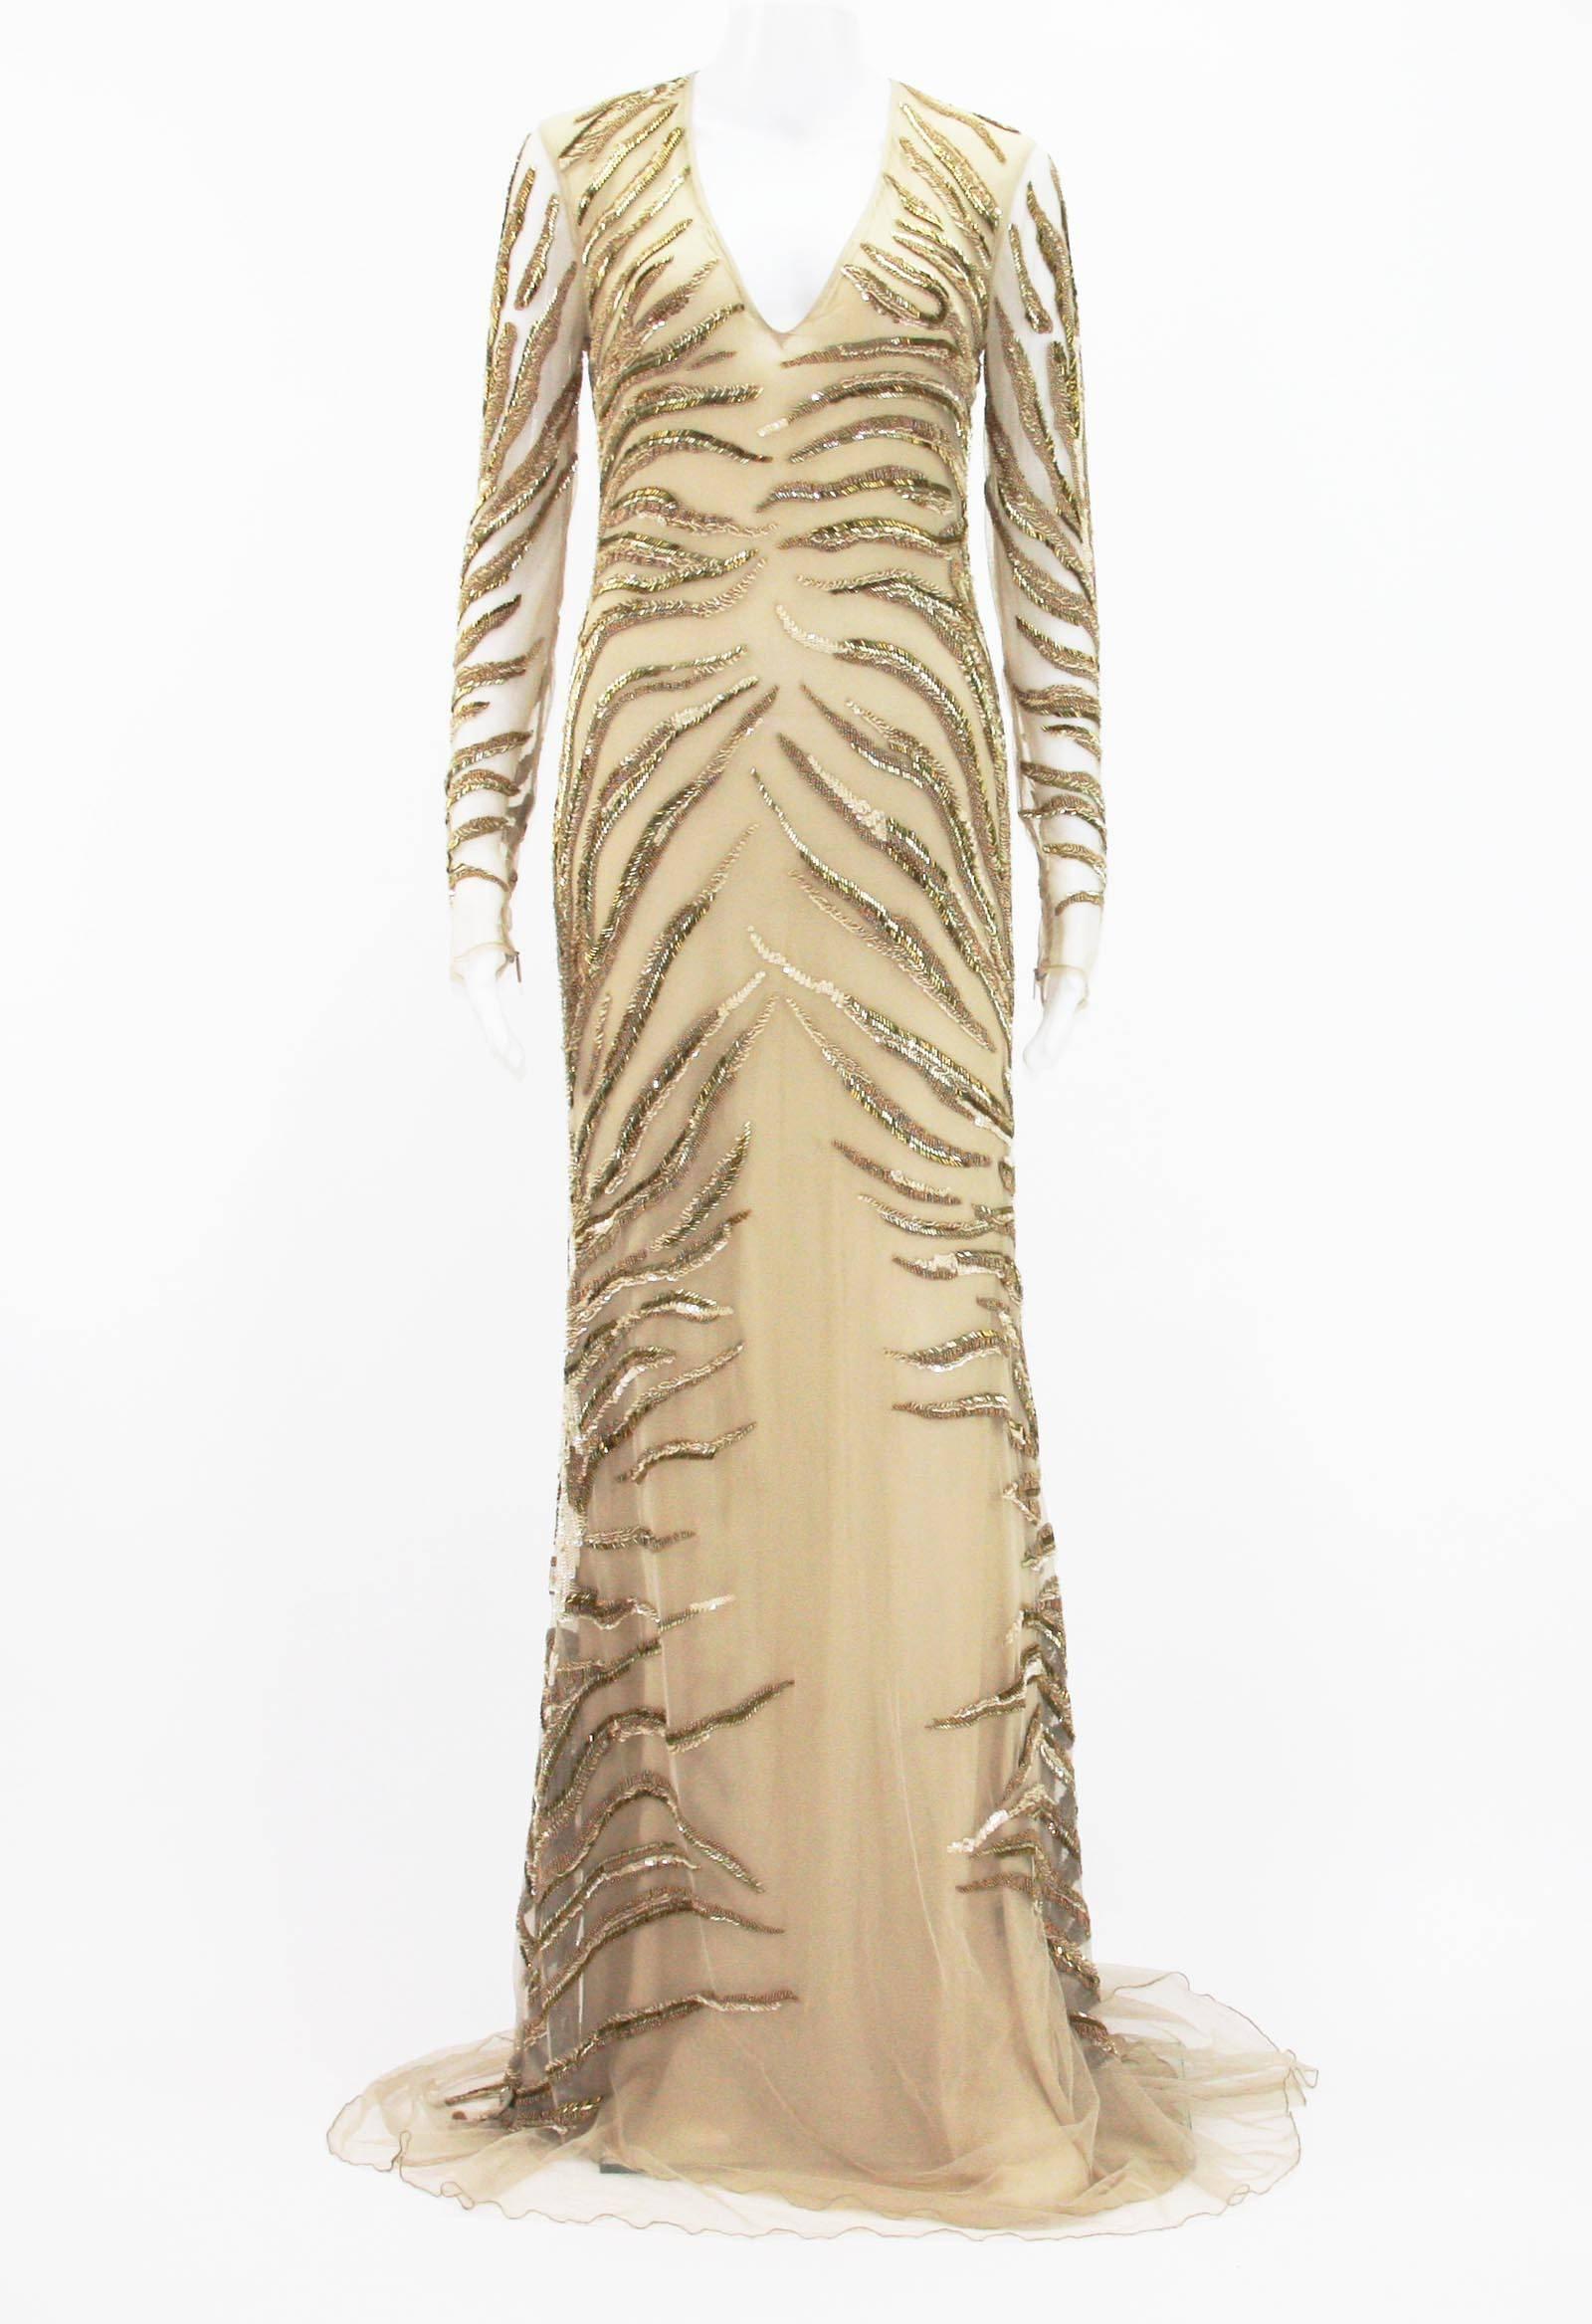 New Roberto Cavalli Nude Beaded Embroidery Mesh Dress Gown 
Designer size 40, Color - Desert.
Fully Beaded in Gold and Silver tone Beads and Nude tone Sequins over the Mesh, Fully Lined - 100% Silk, Back size zip closure, Stretch.
Measurements: